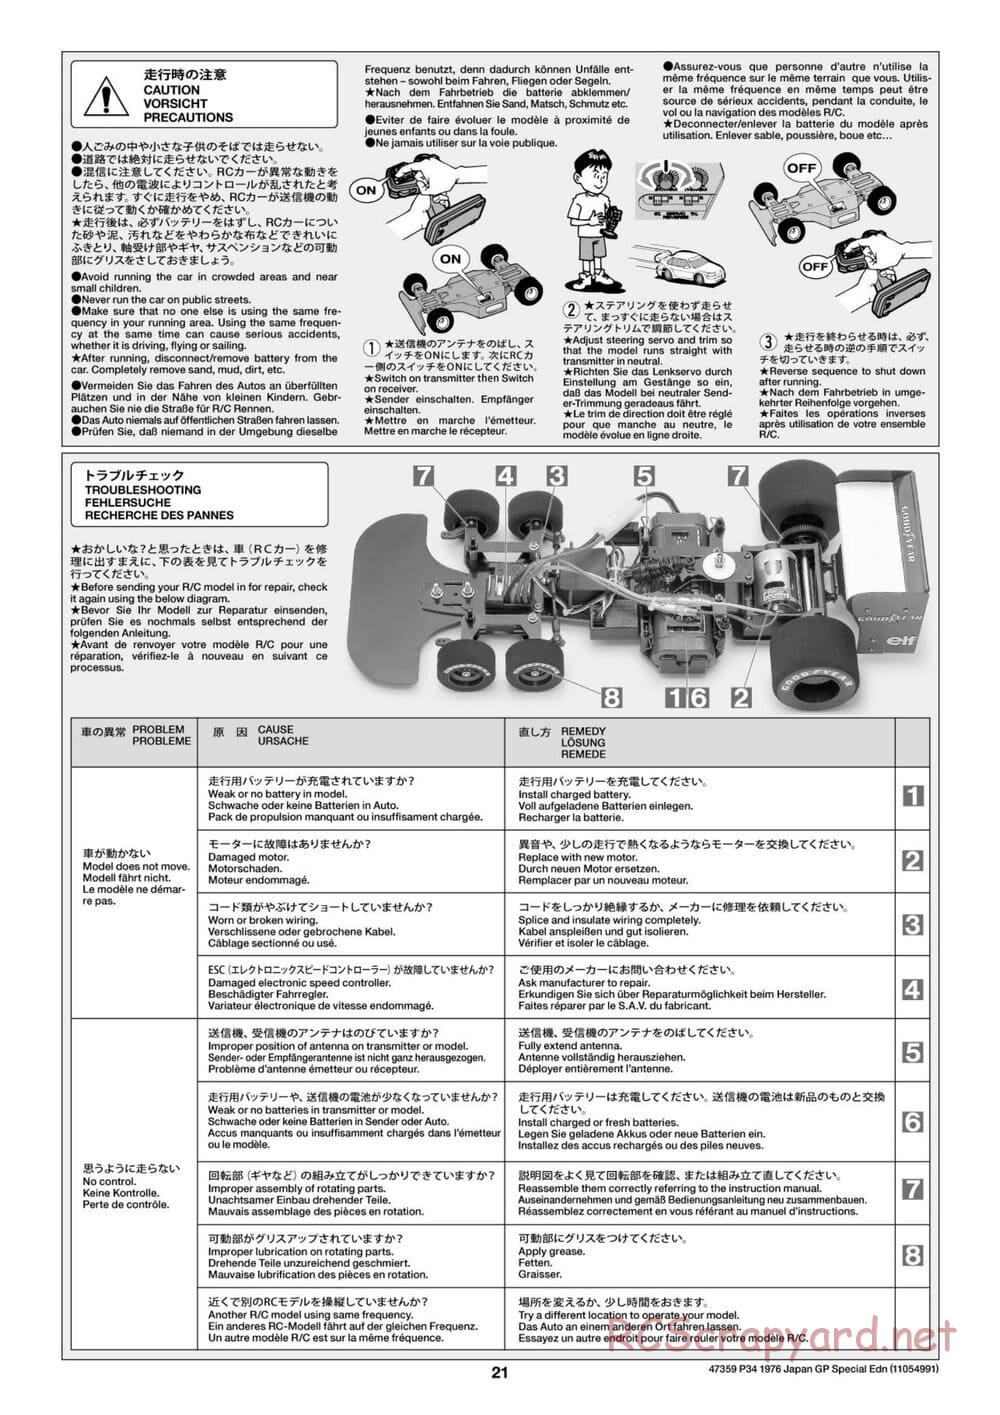 Tamiya - Tyrrell P34 1976 Japan Grand Prix Special - F103-6W Chassis - Manual - Page 21